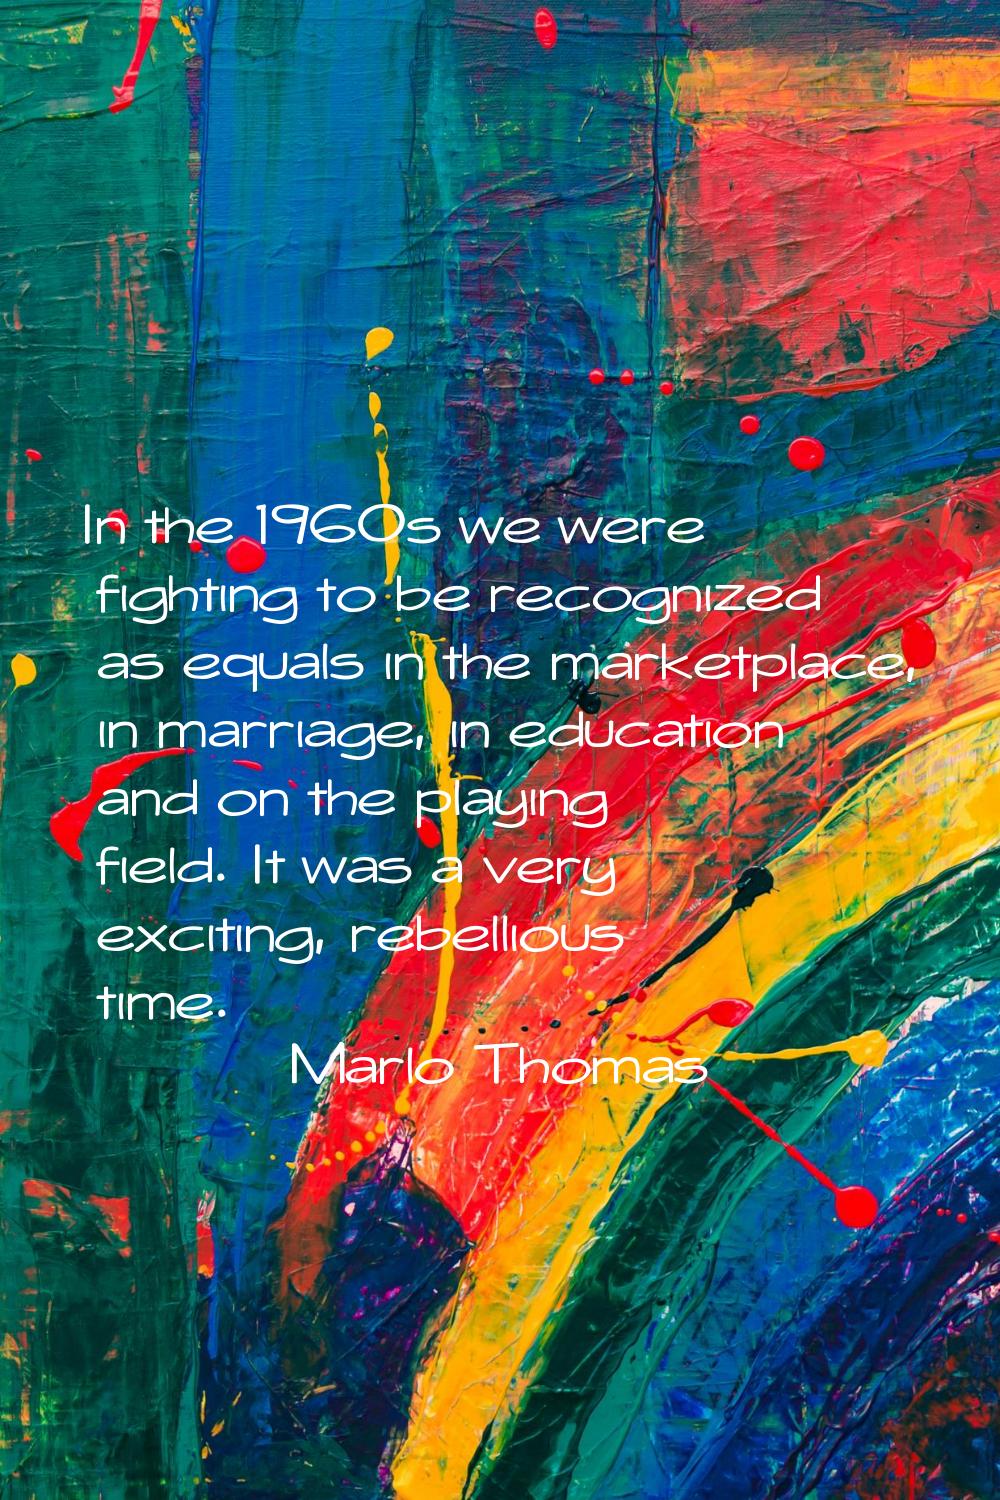 In the 1960s we were fighting to be recognized as equals in the marketplace, in marriage, in educat